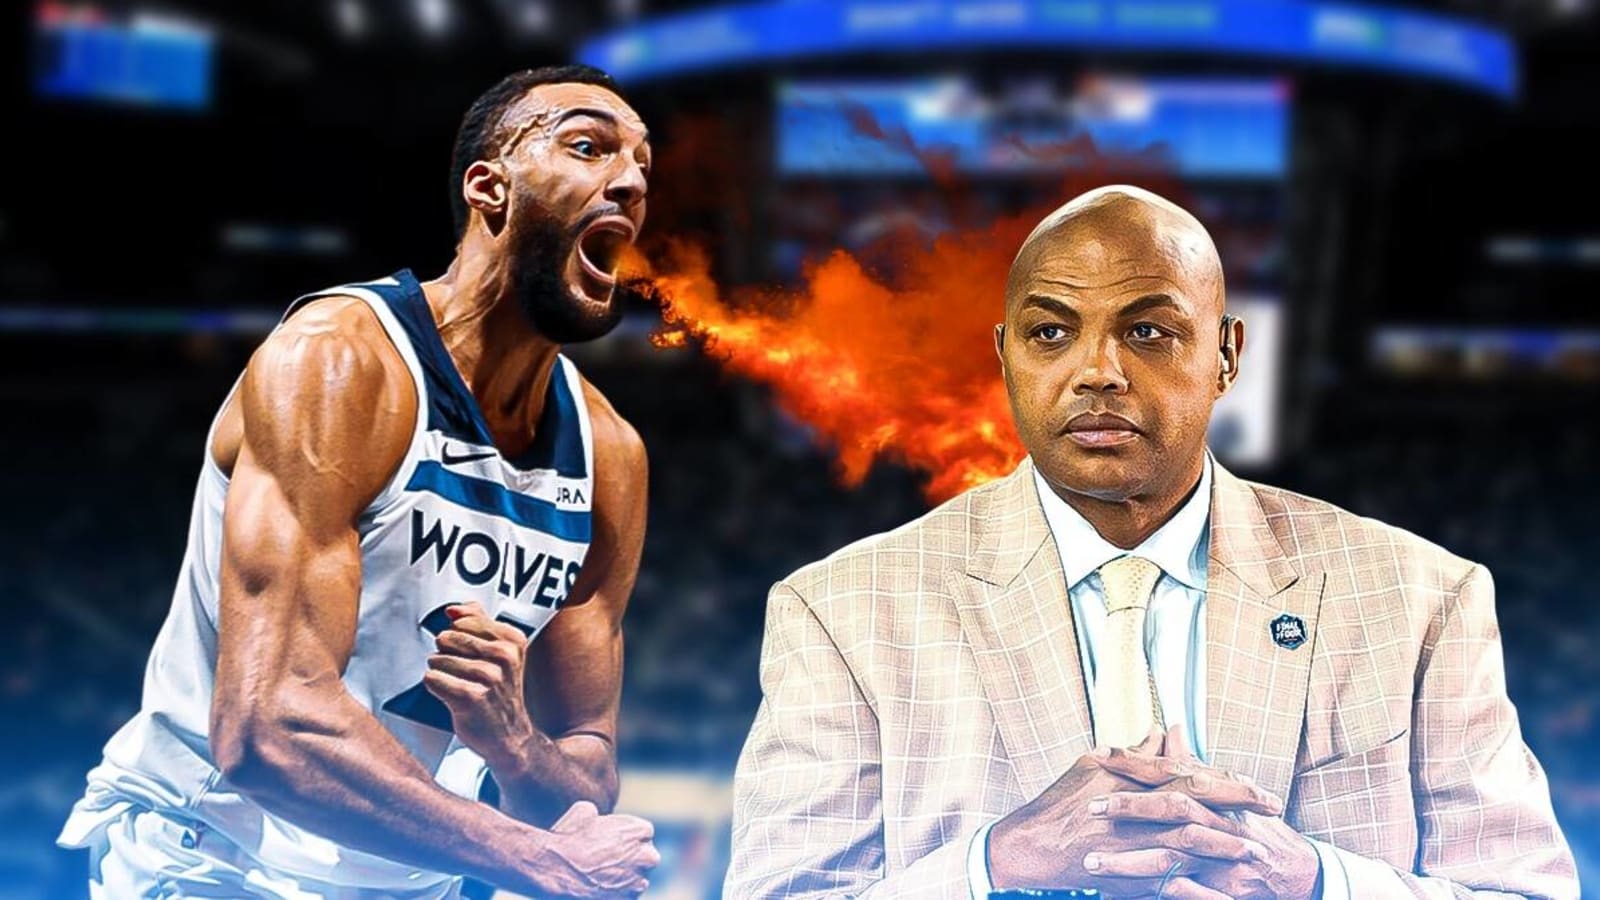 Timberwolves’ Rudy Gobert fires back at Charles Barkley disrespect with savage diss